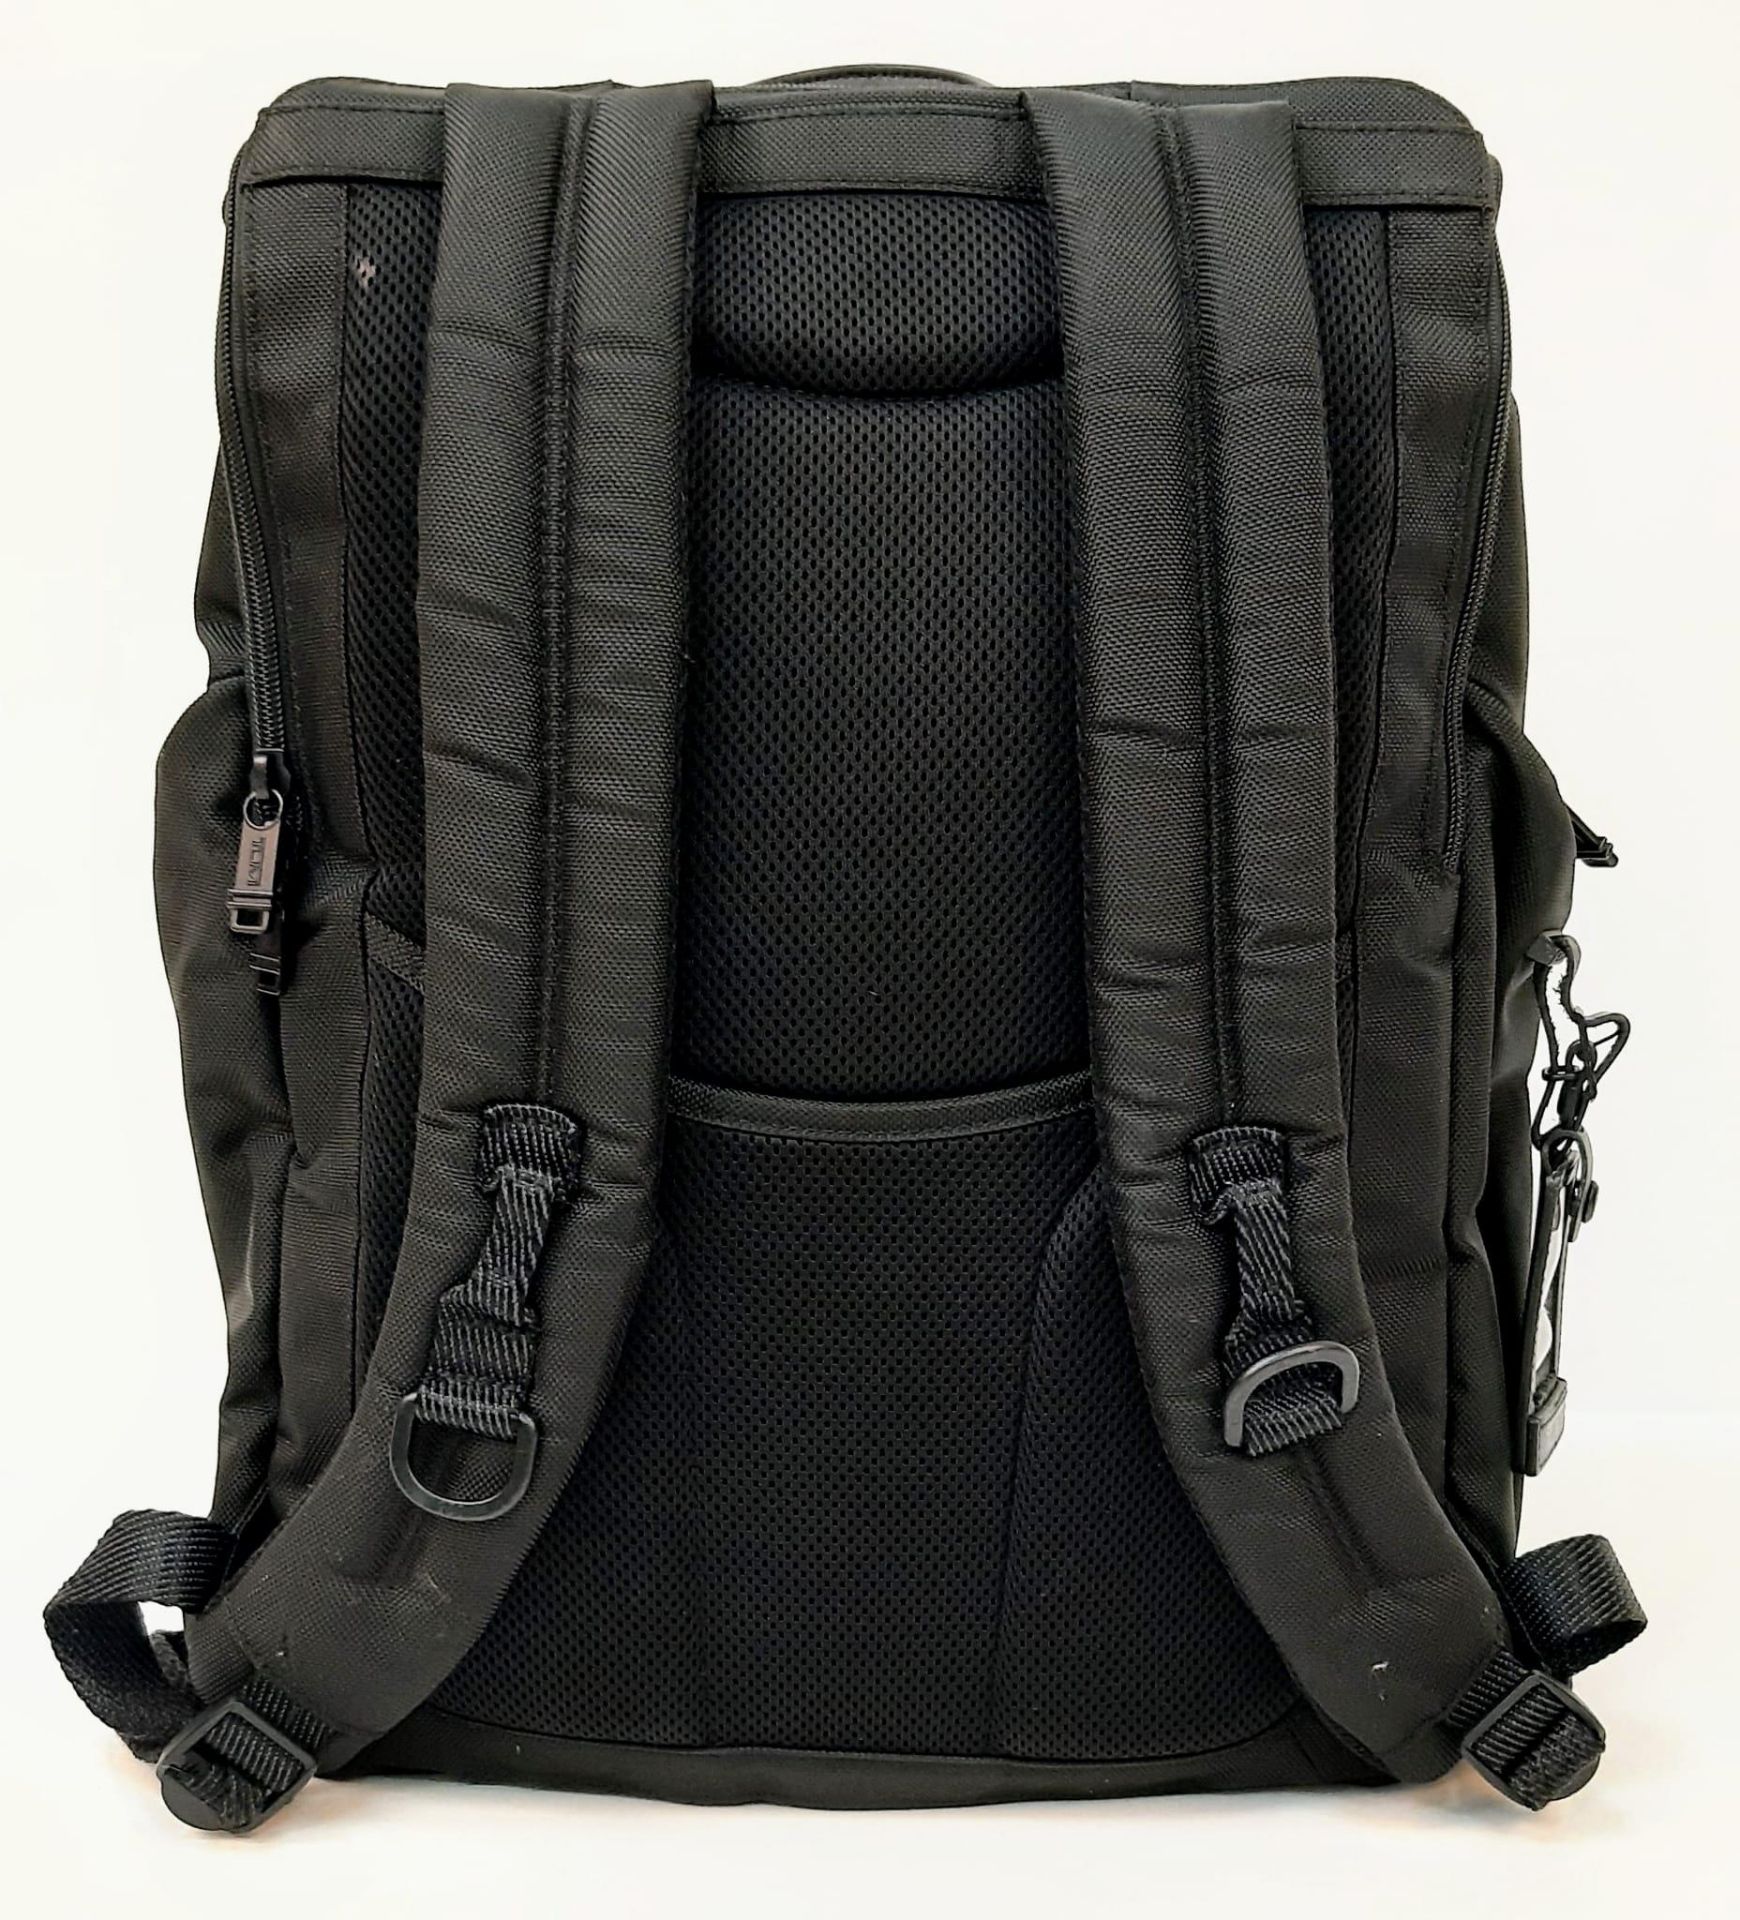 A TUMI Lark Black Backpack, 23L Capacity, Pockets for 16" Laptop, Tablet, Phone and Water Bottle. - Image 3 of 6